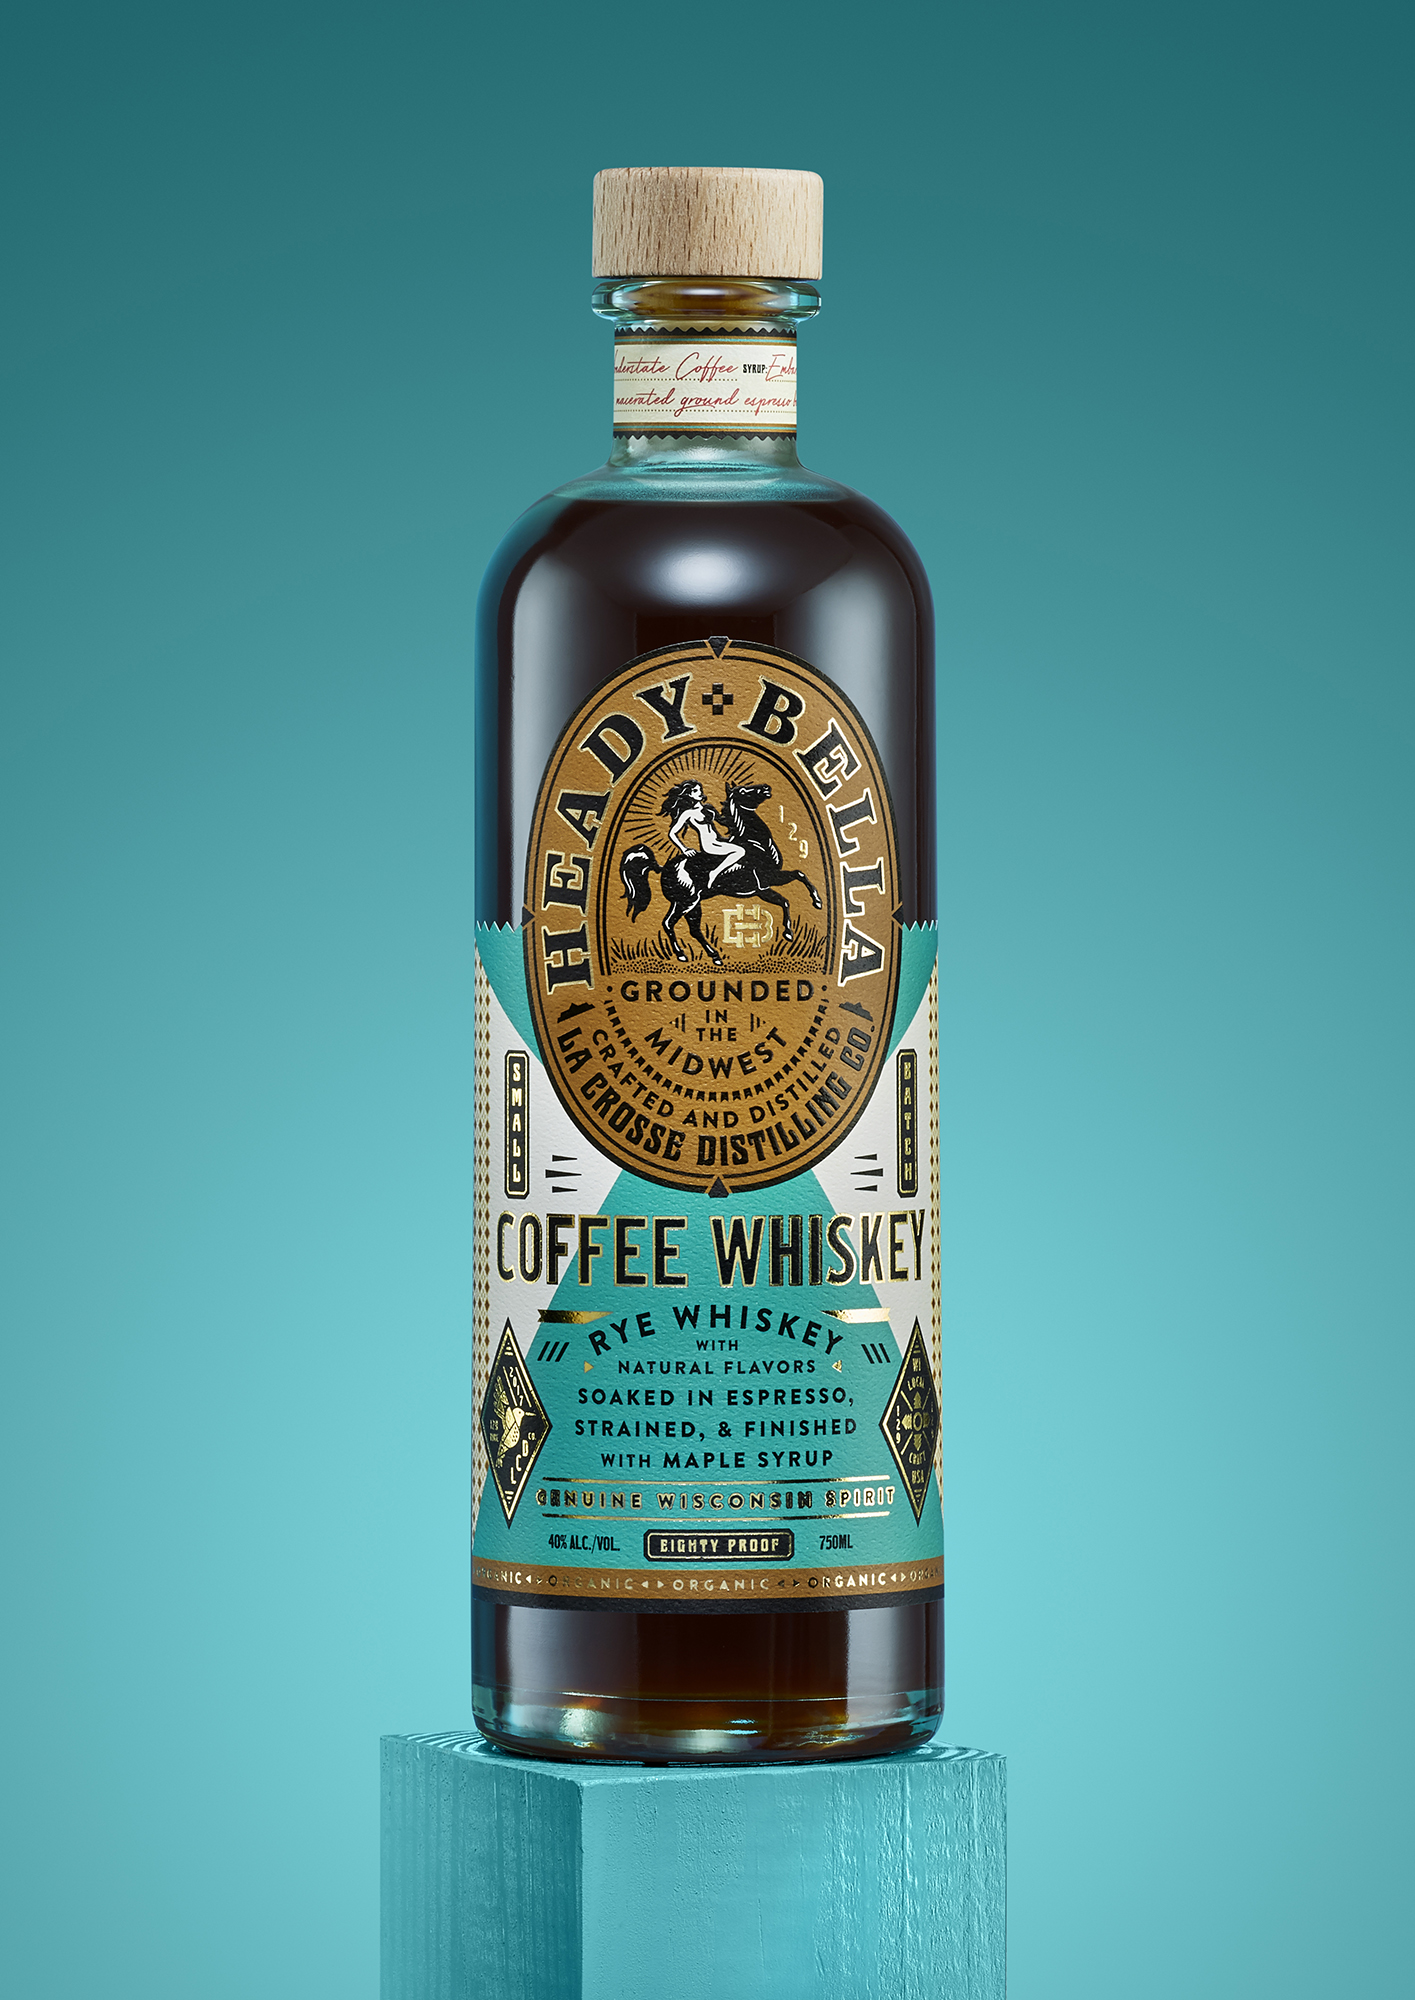 Heady Bella Coffee Whiskey brand and package design